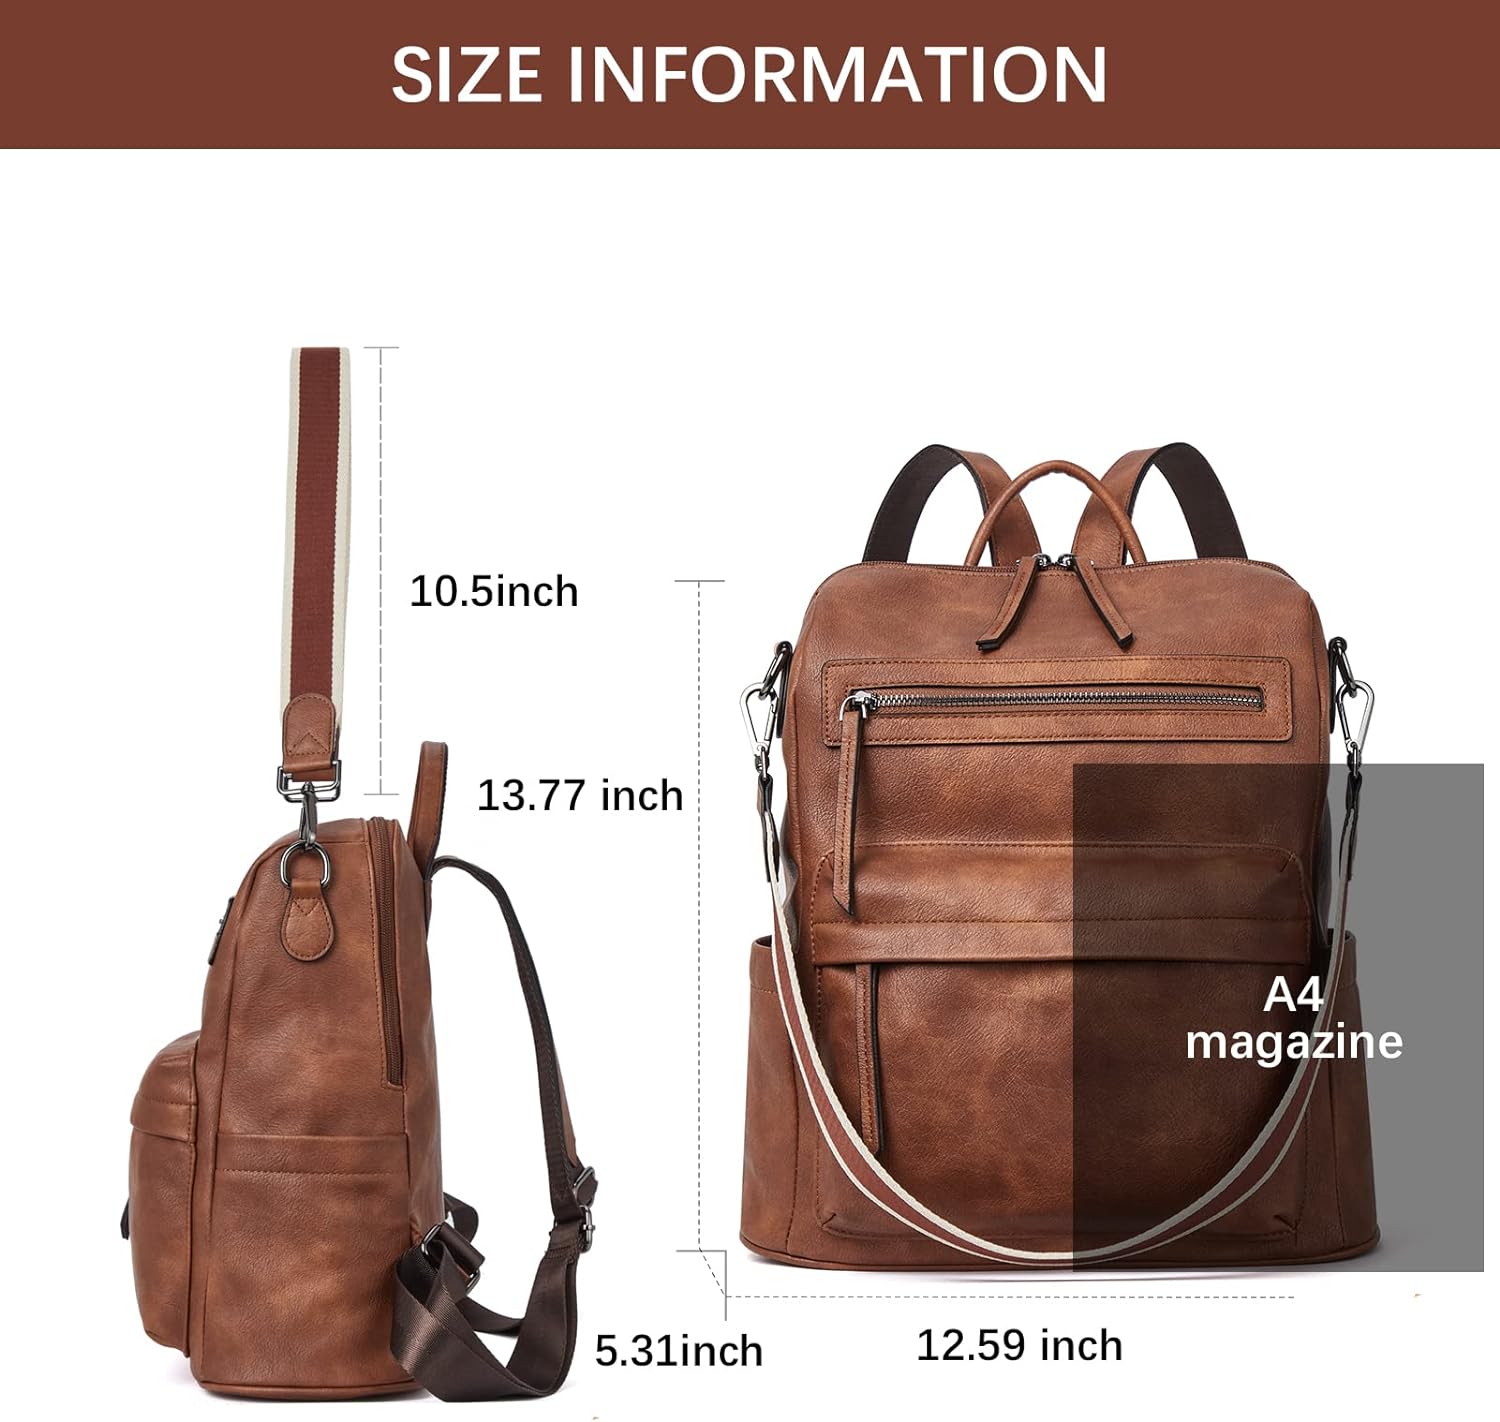 Designer Womens Mini Leather Backpack High Quality Mini Clutch Handbag With  Crossbody And Shoulder Straps, Wallet Included From Zhouzhoubao123, $52.56  | DHgate.Com